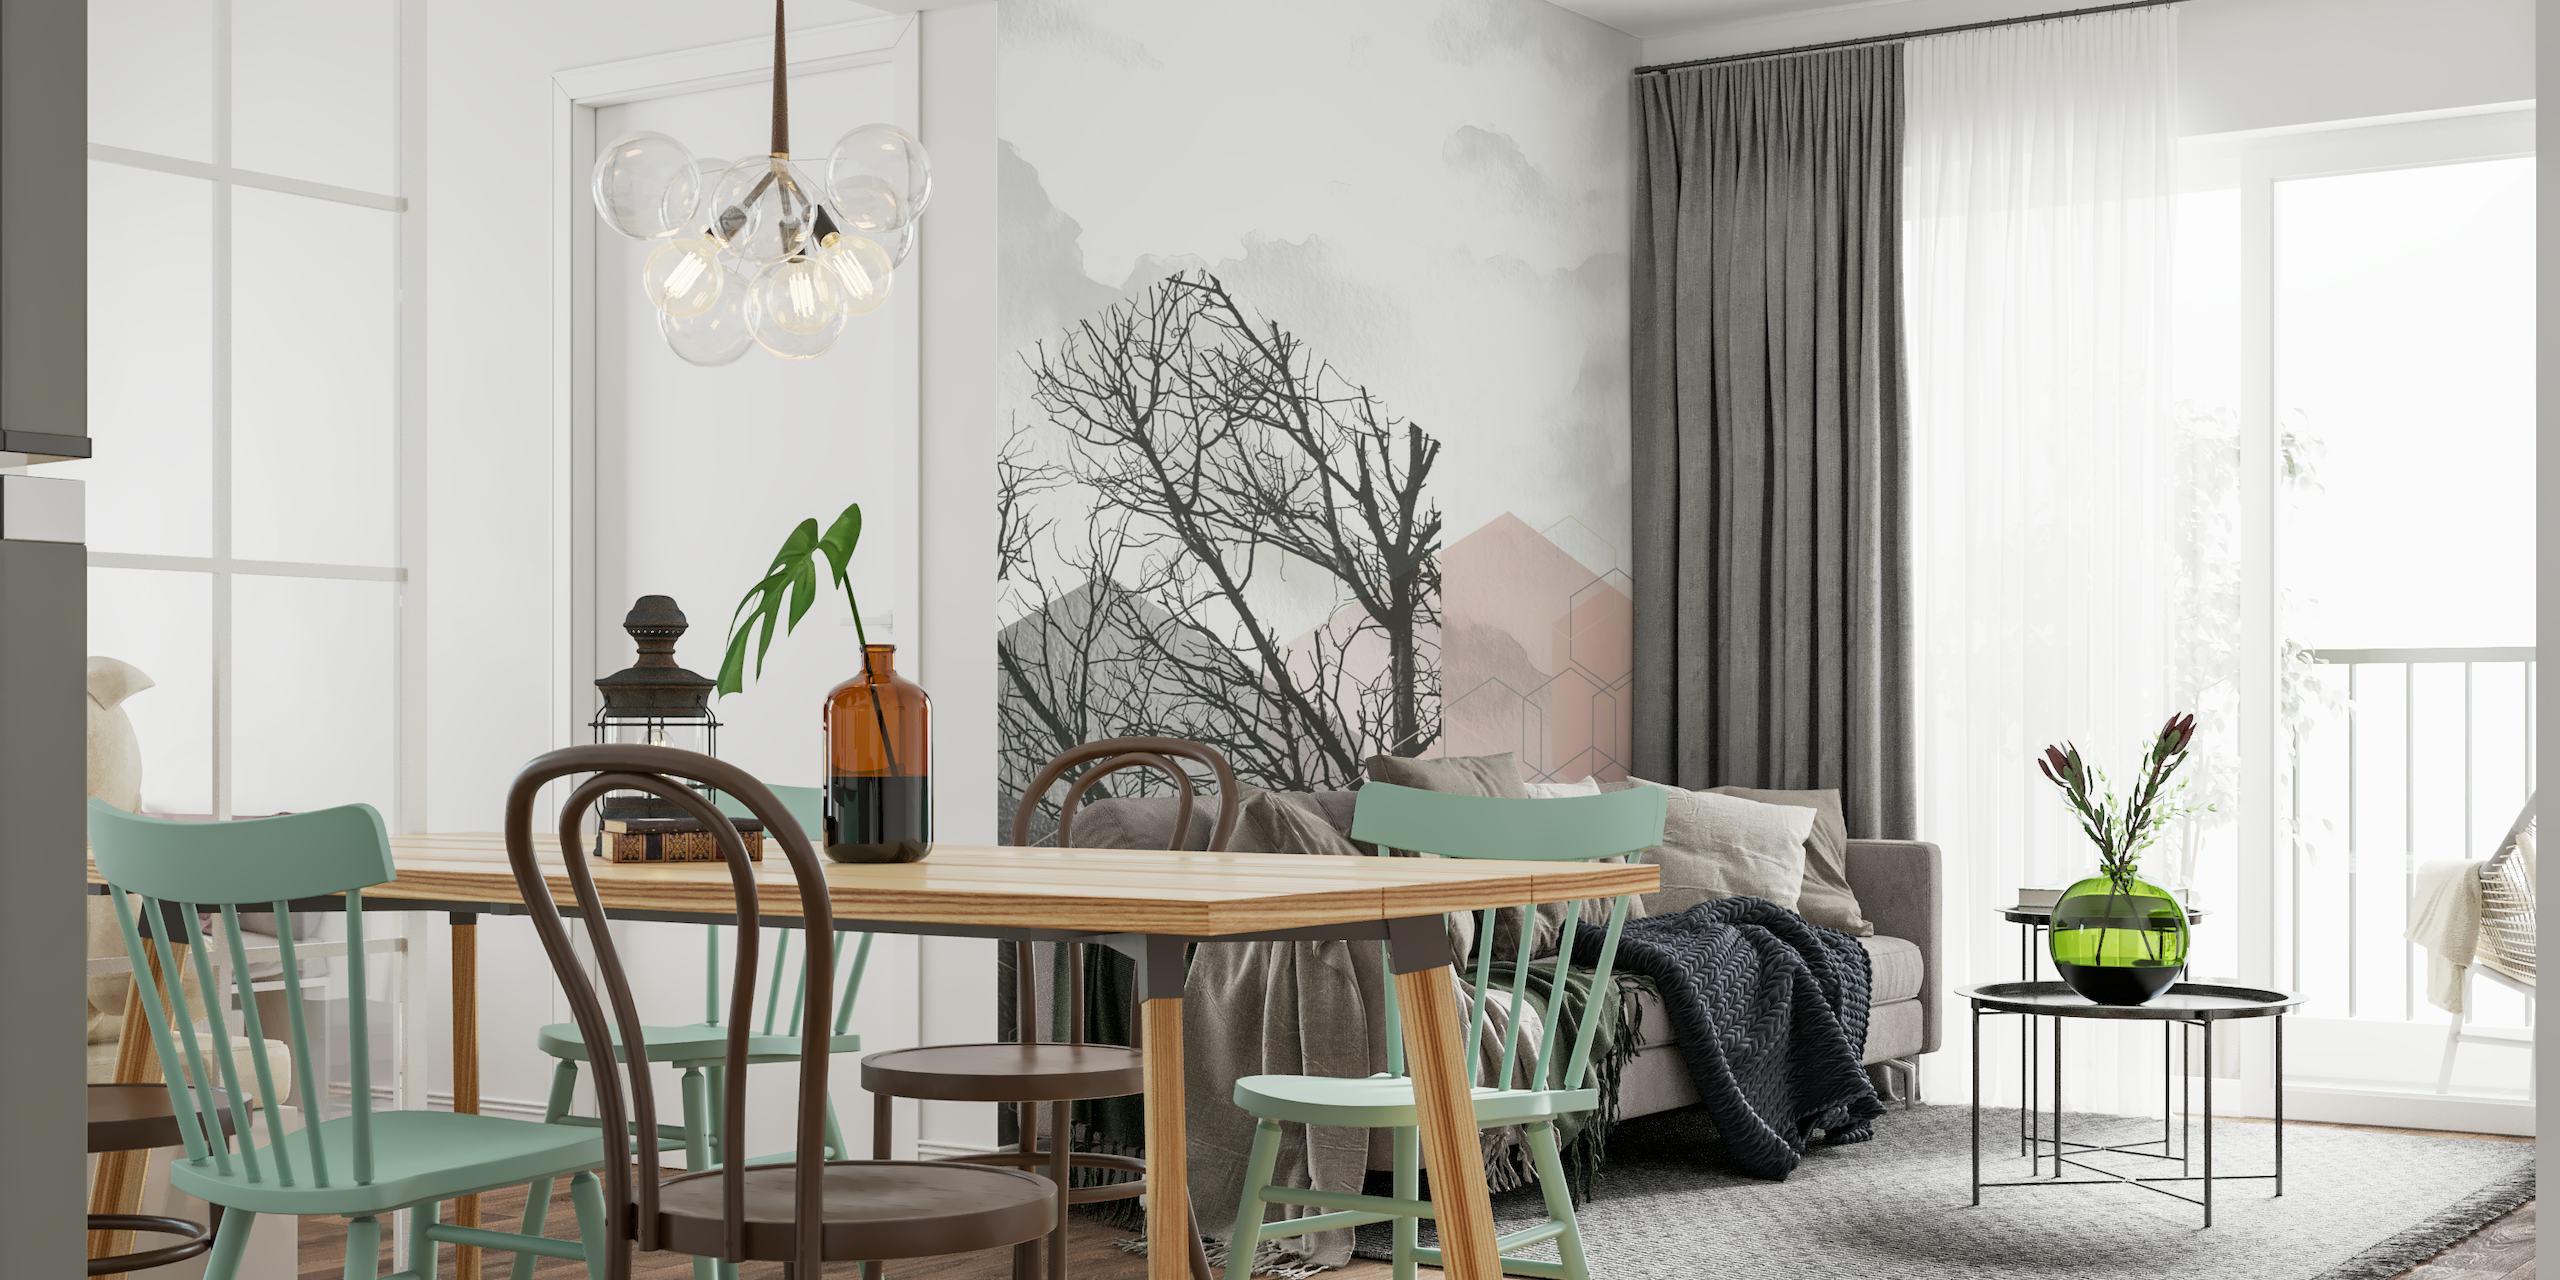 Abstract Geometric wall mural with pastel tones and bare tree silhouettes